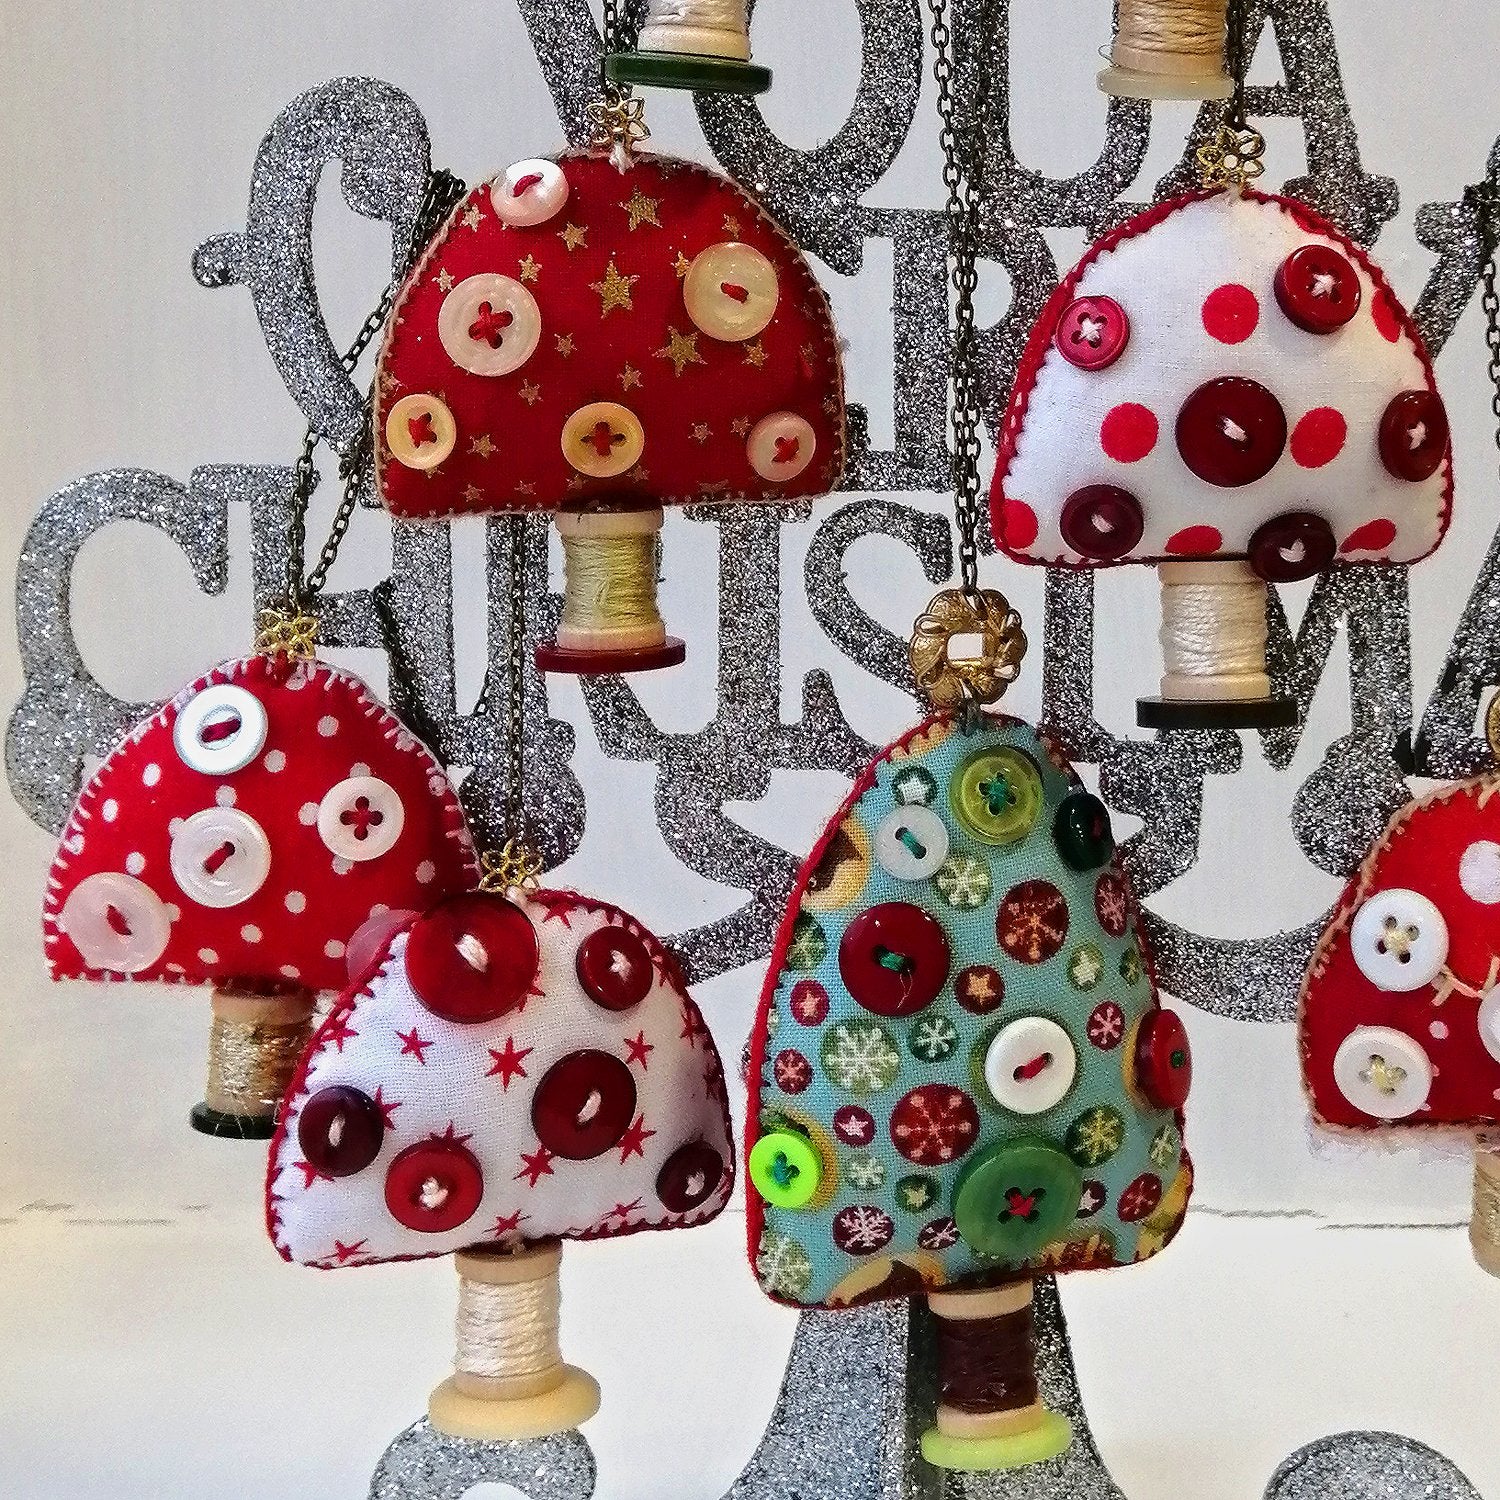 Collection of fabric toadstool ornaments with buttons and spools hanging from a silver glitter tree.